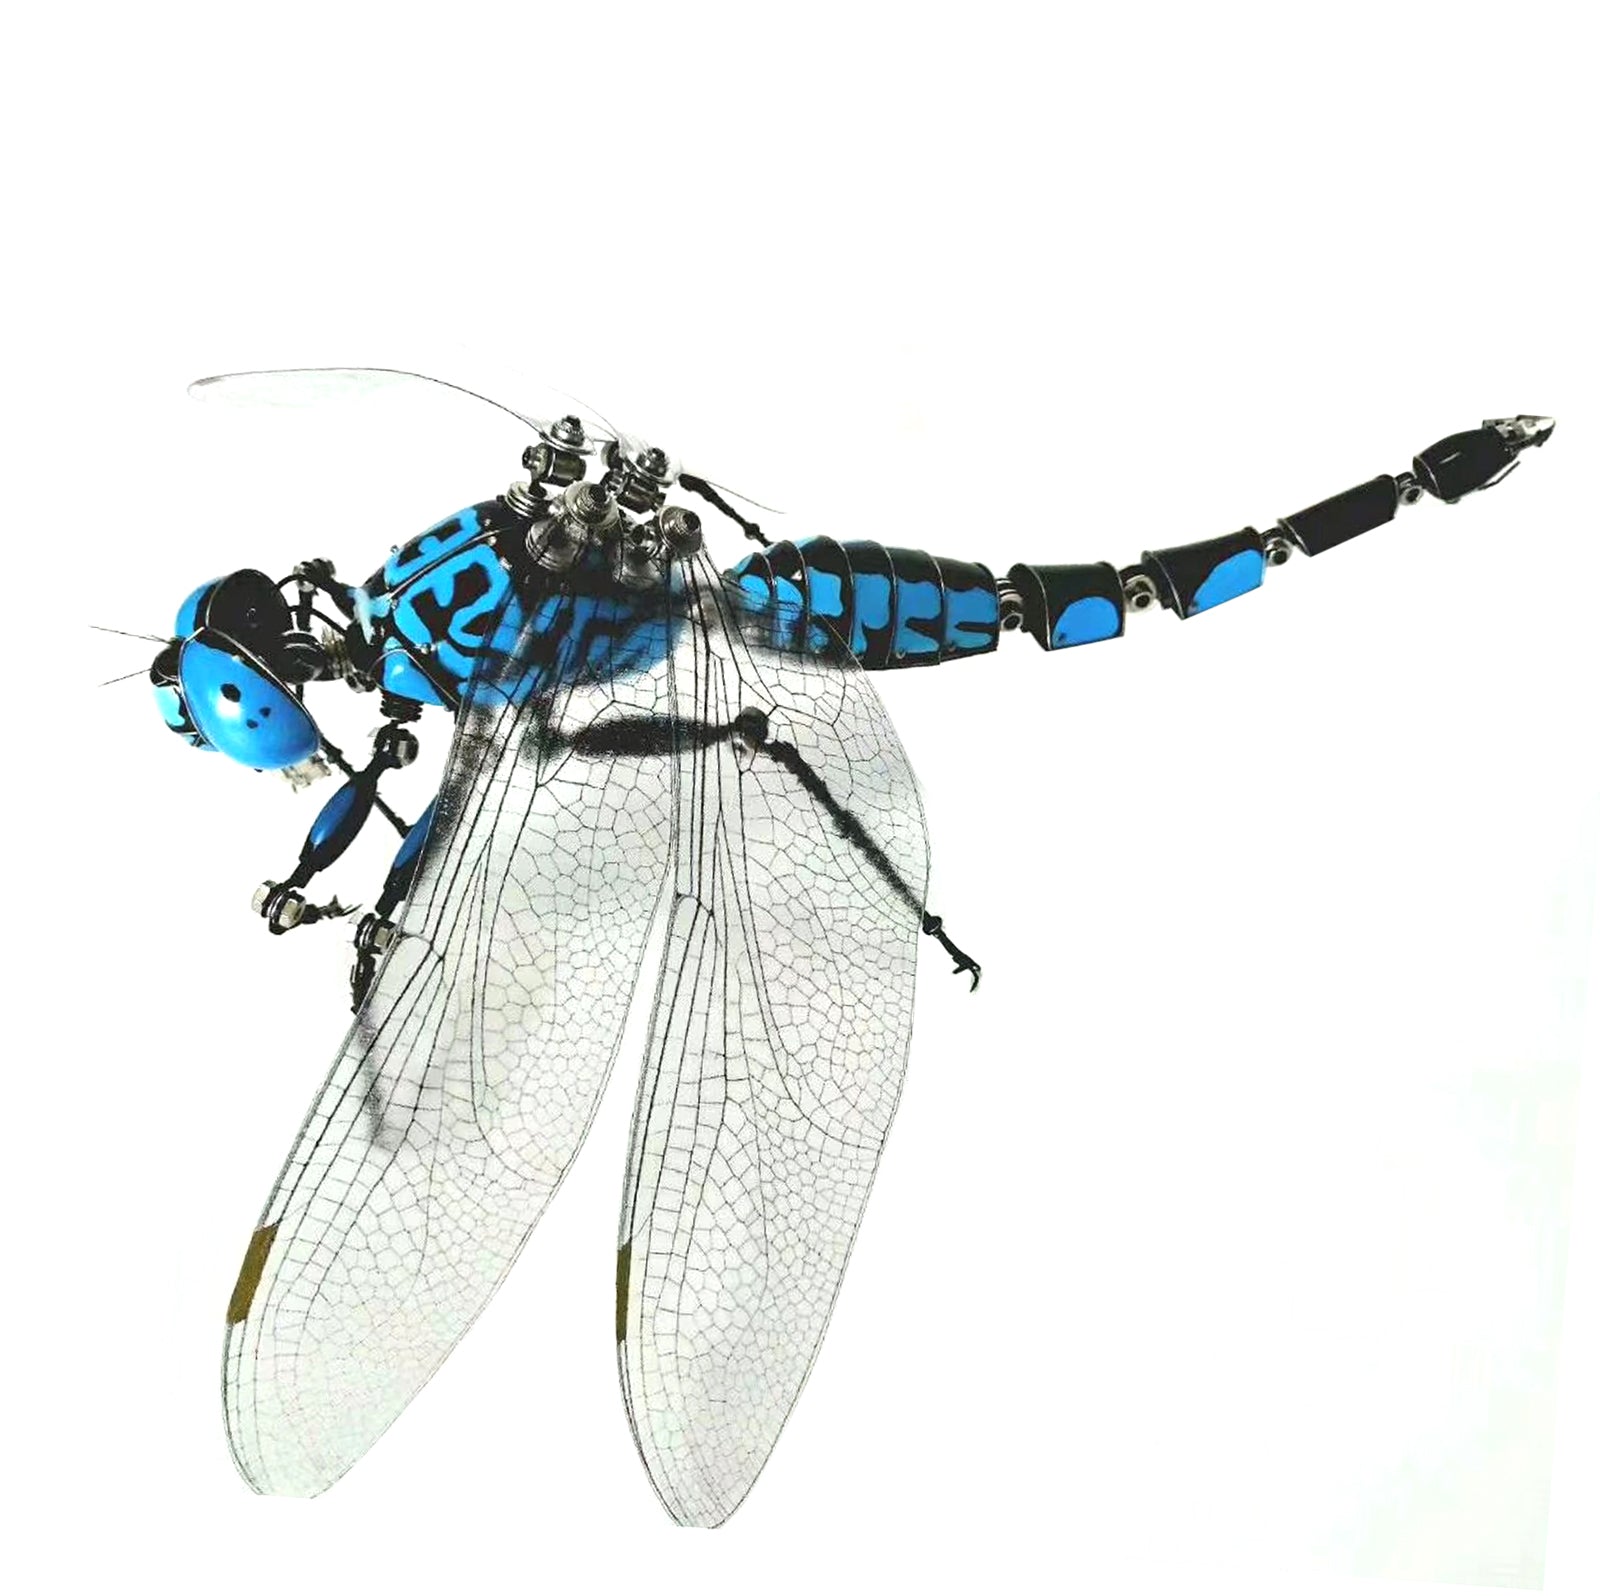 Steampunk 3D Metal Assembled Blue Dragonfly Insect Bug Sculpture Model